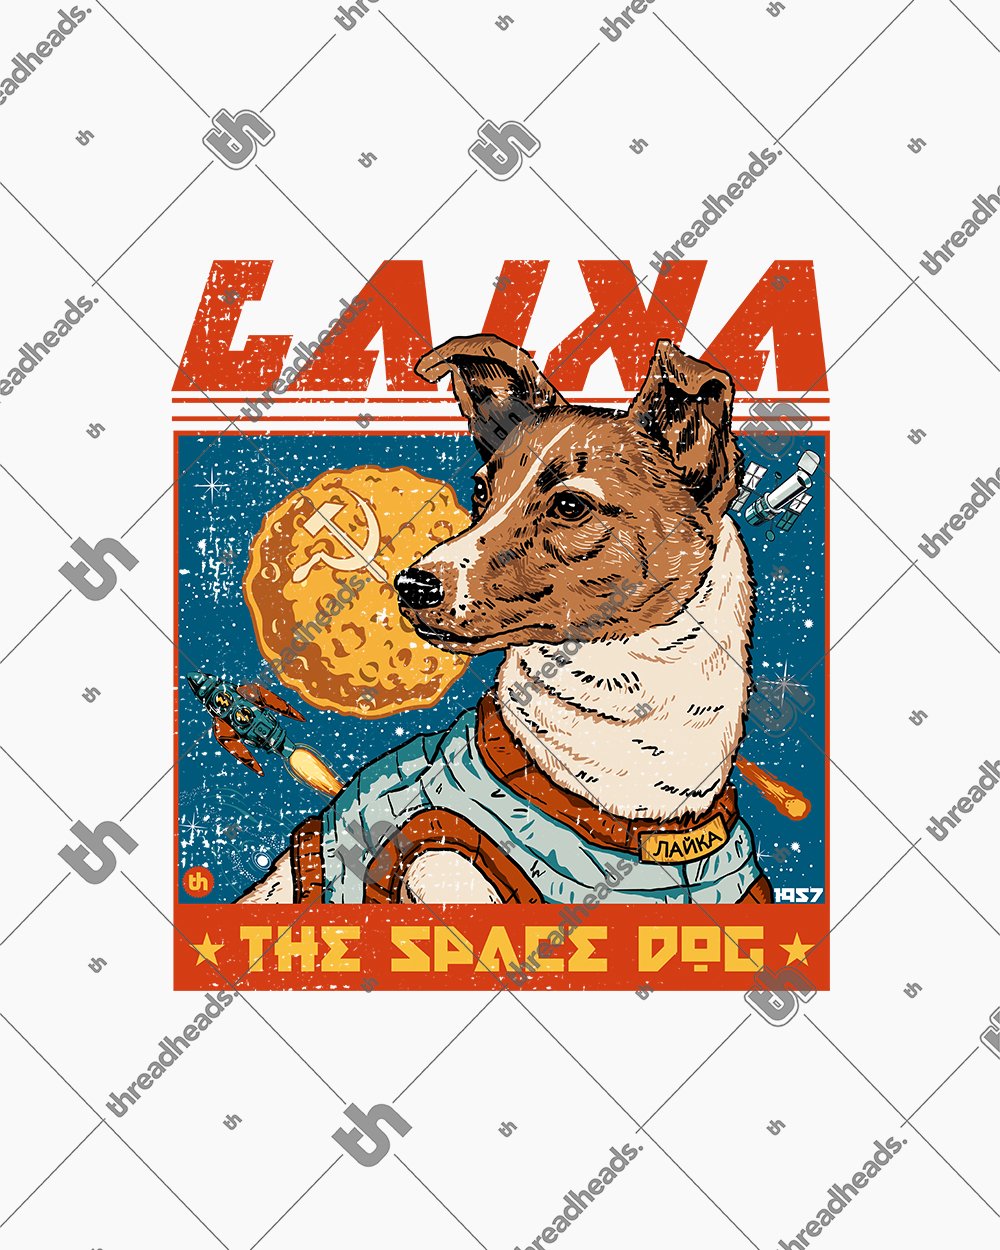 Laika the Space Dog Hoodie Europe Online #colour_white